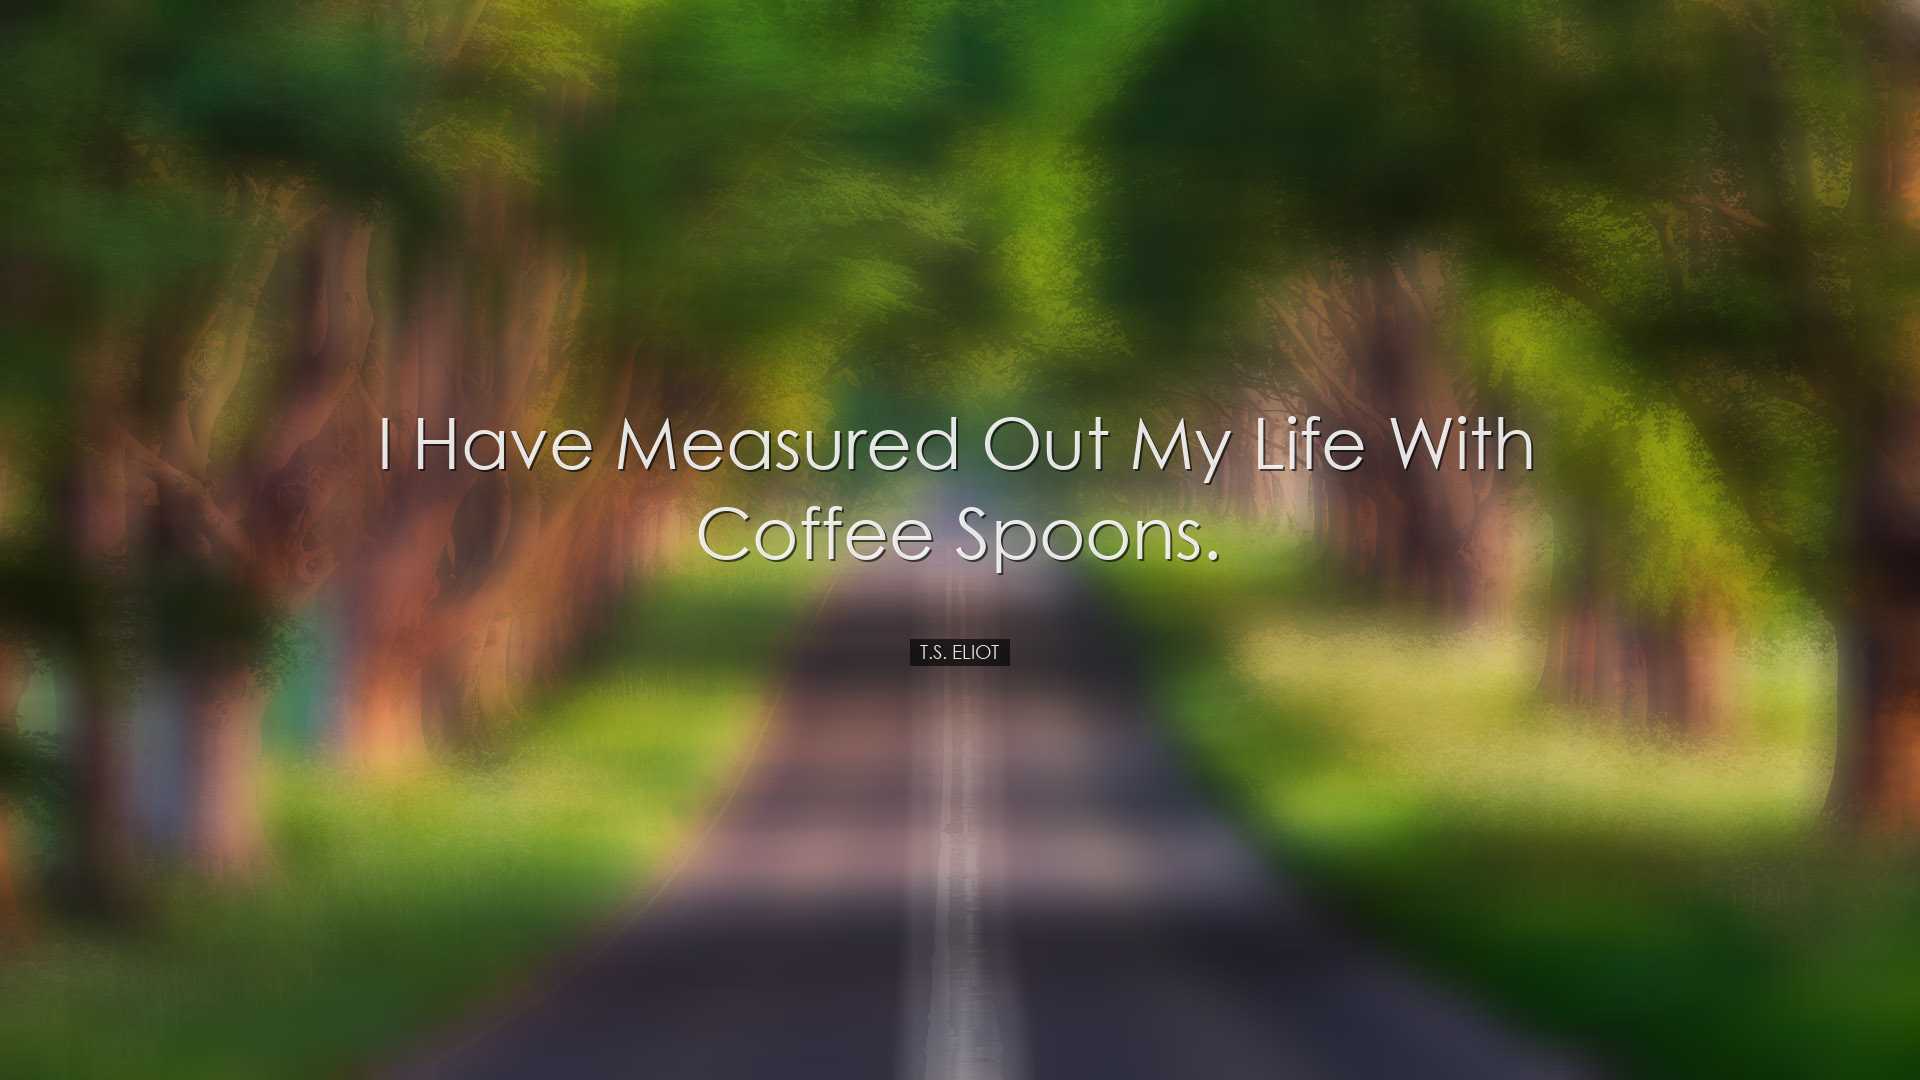 I have measured out my life with coffee spoons. - T.S. Eliot